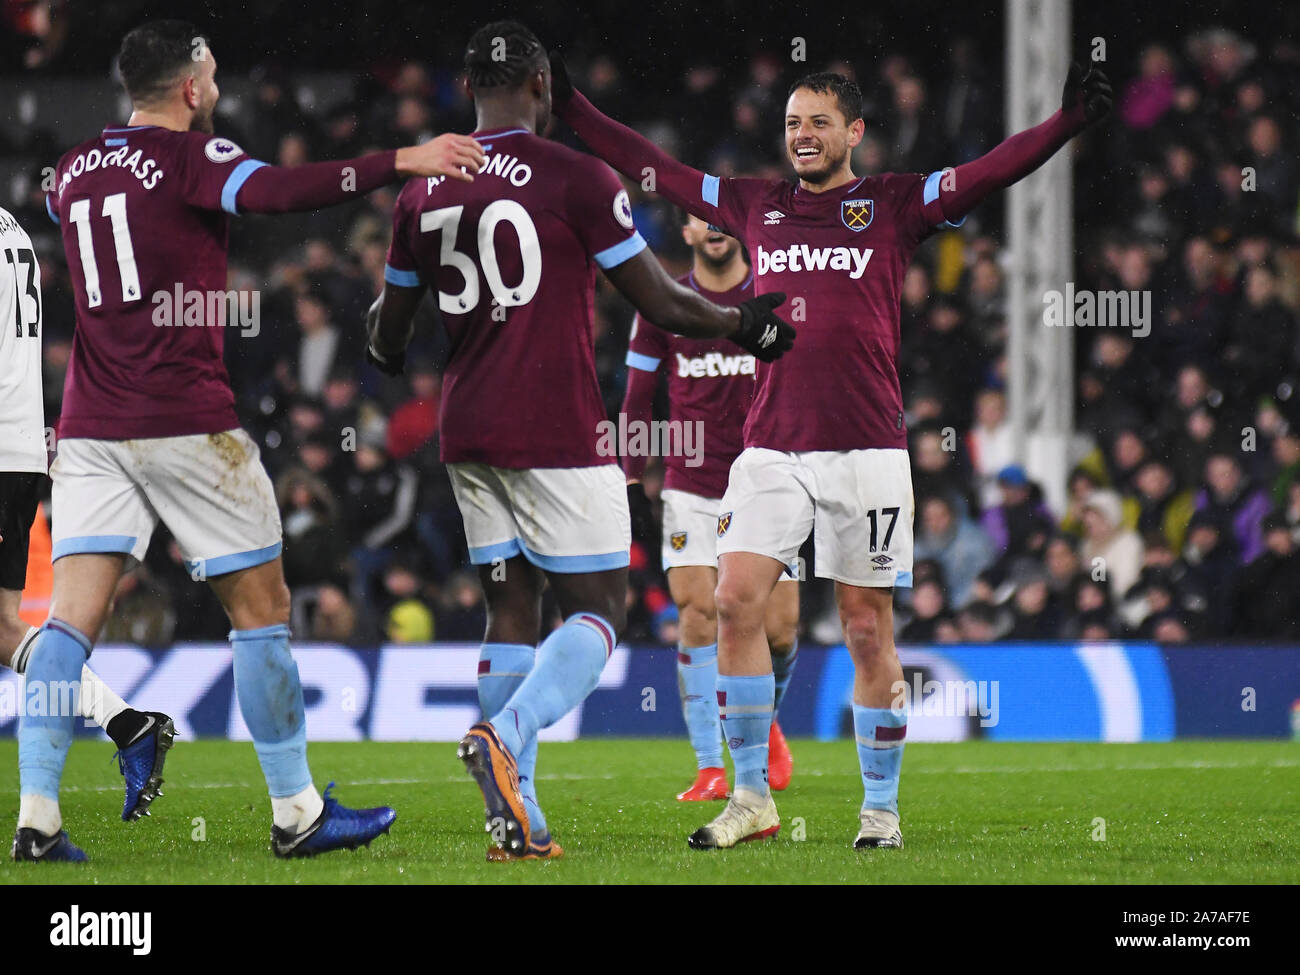 LONDON, ENGLAND - DECEMBER 15, 2018: Javier Hernandez Balcazar (Chicharito) of West Ham (R) celebrates with Michail Gregory Antonio of West Ham after he scored a goal during the 2018/19 Premier League game between Fulham FC and West Ham United at Craven Cottage. Stock Photo